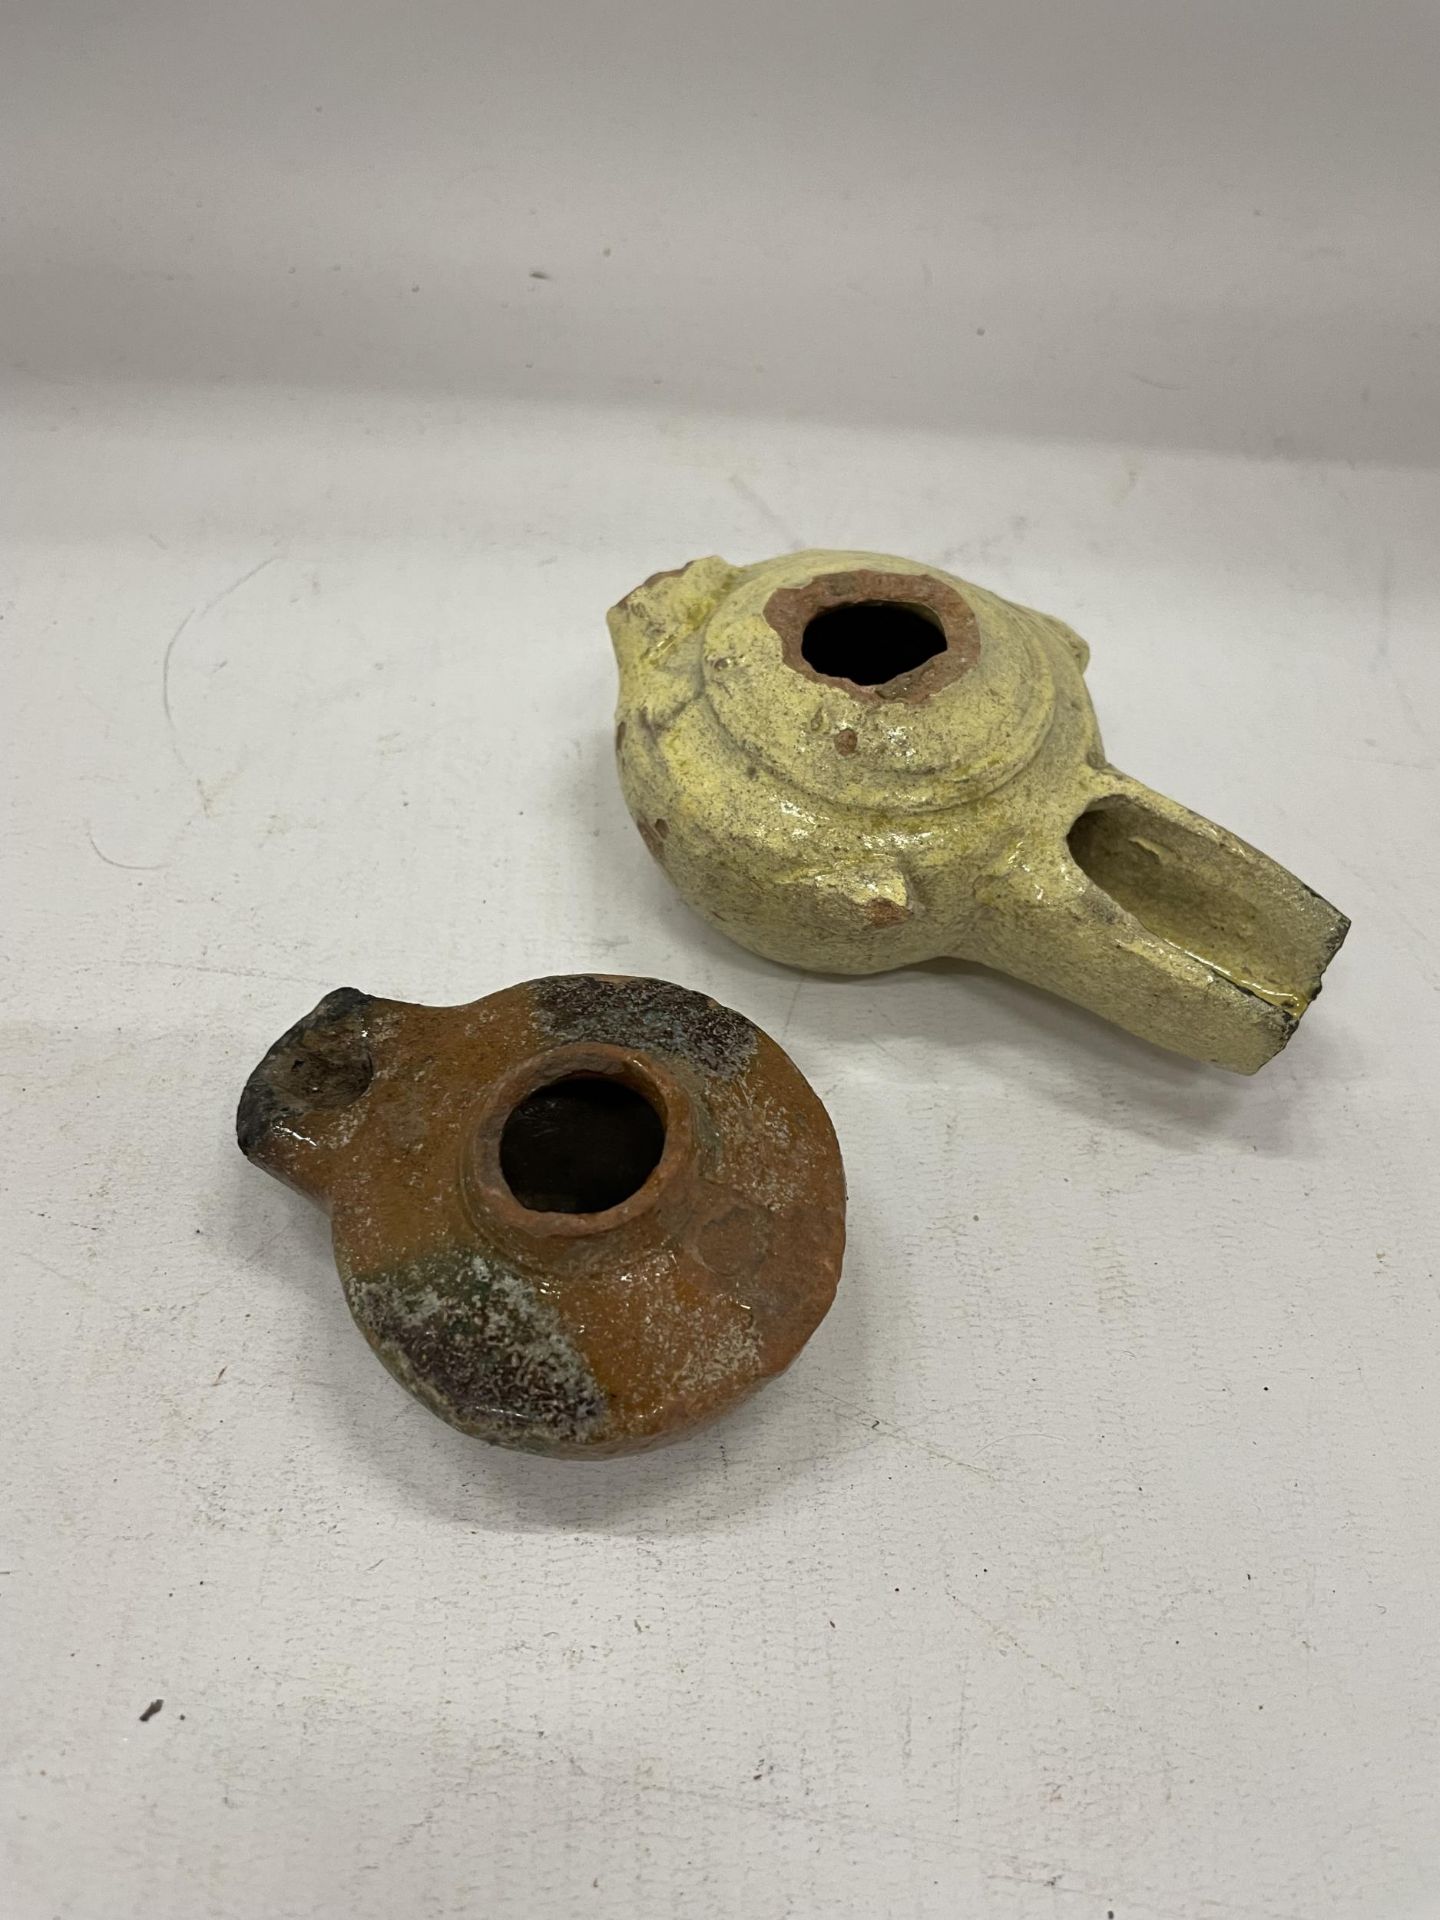 A PAIR OF FATAMID CALIPHATE PERIOD (C.900-1100 AD) GLAZED OIL LAMPS UNEARTHED IN 1926 ARCHAEOLOGICAL - Image 2 of 4